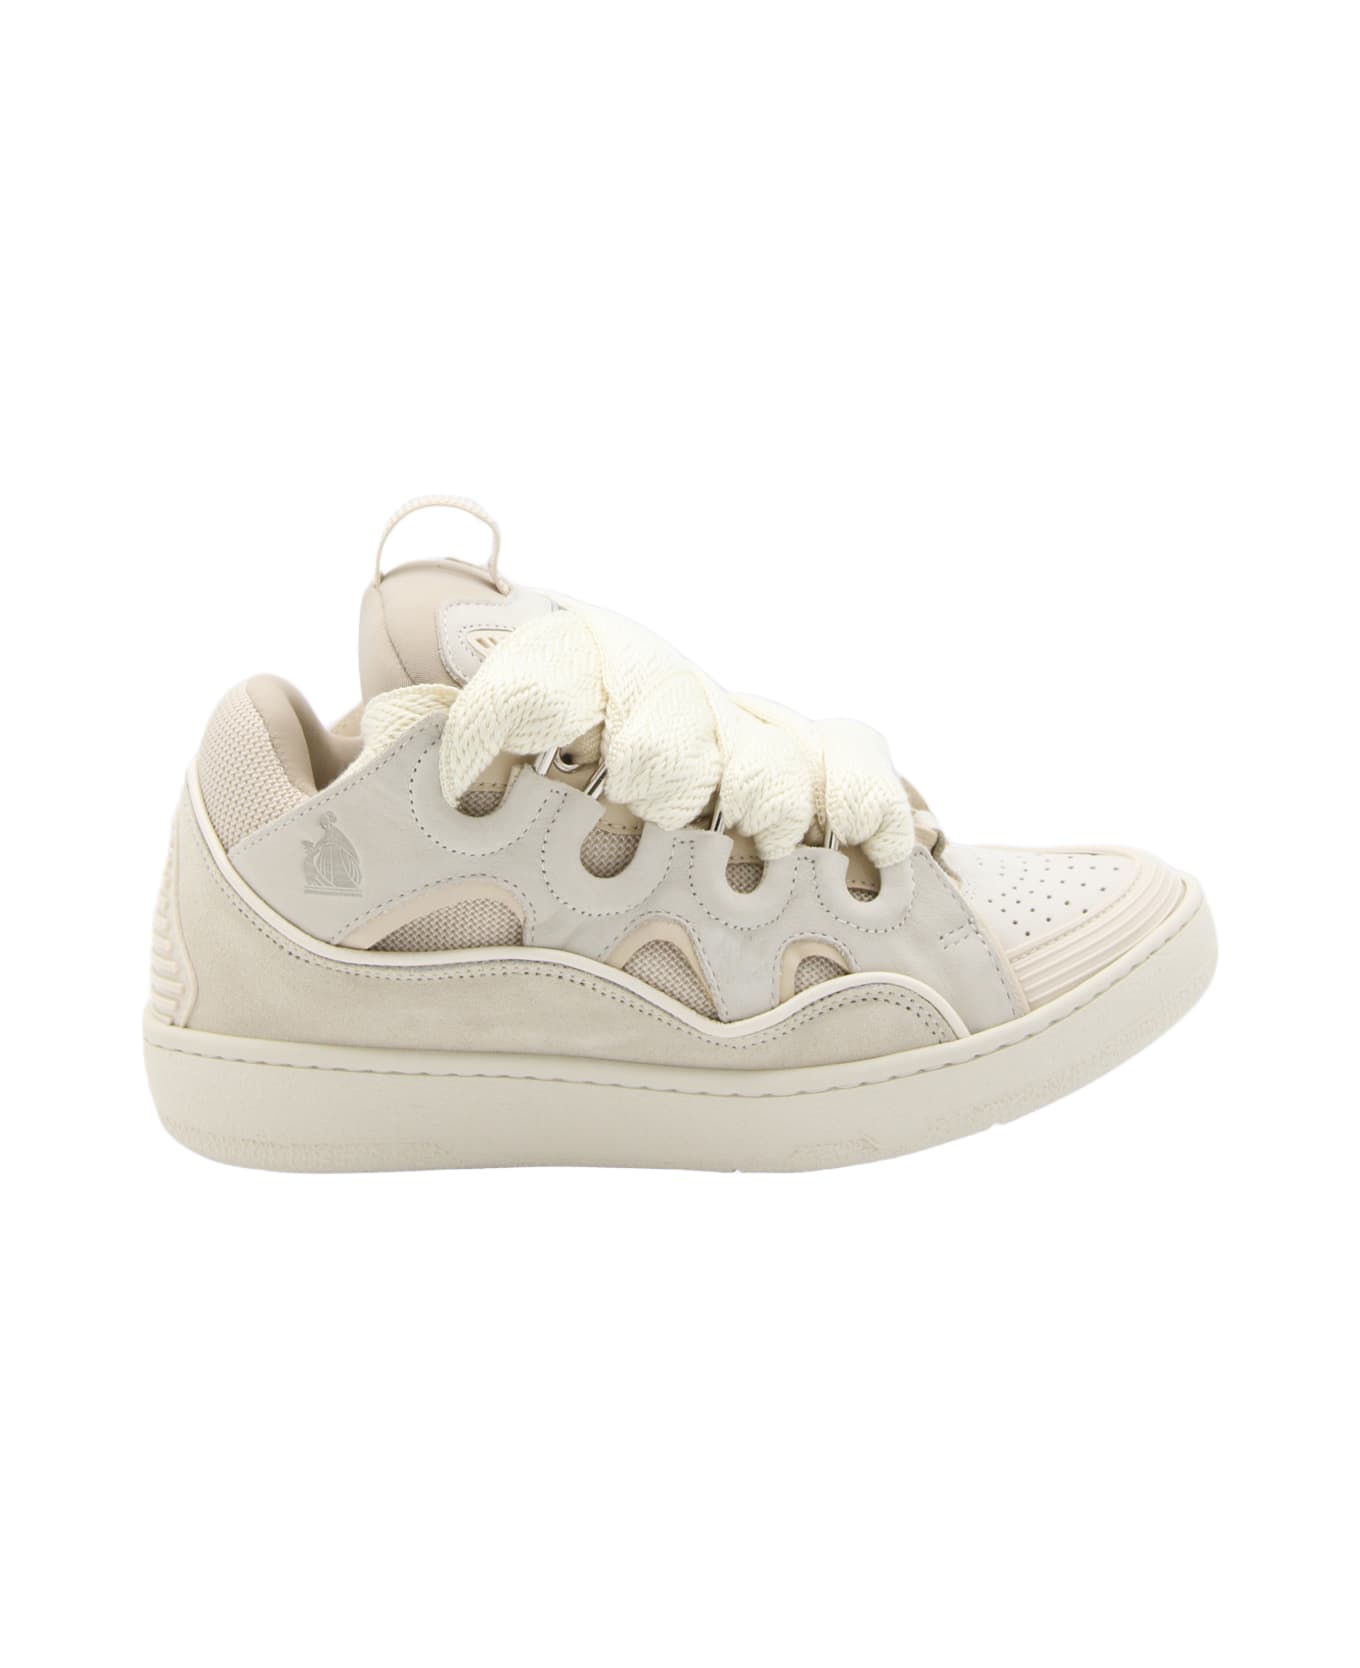 Lanvin White Leather Curb Sneakers - PEACH